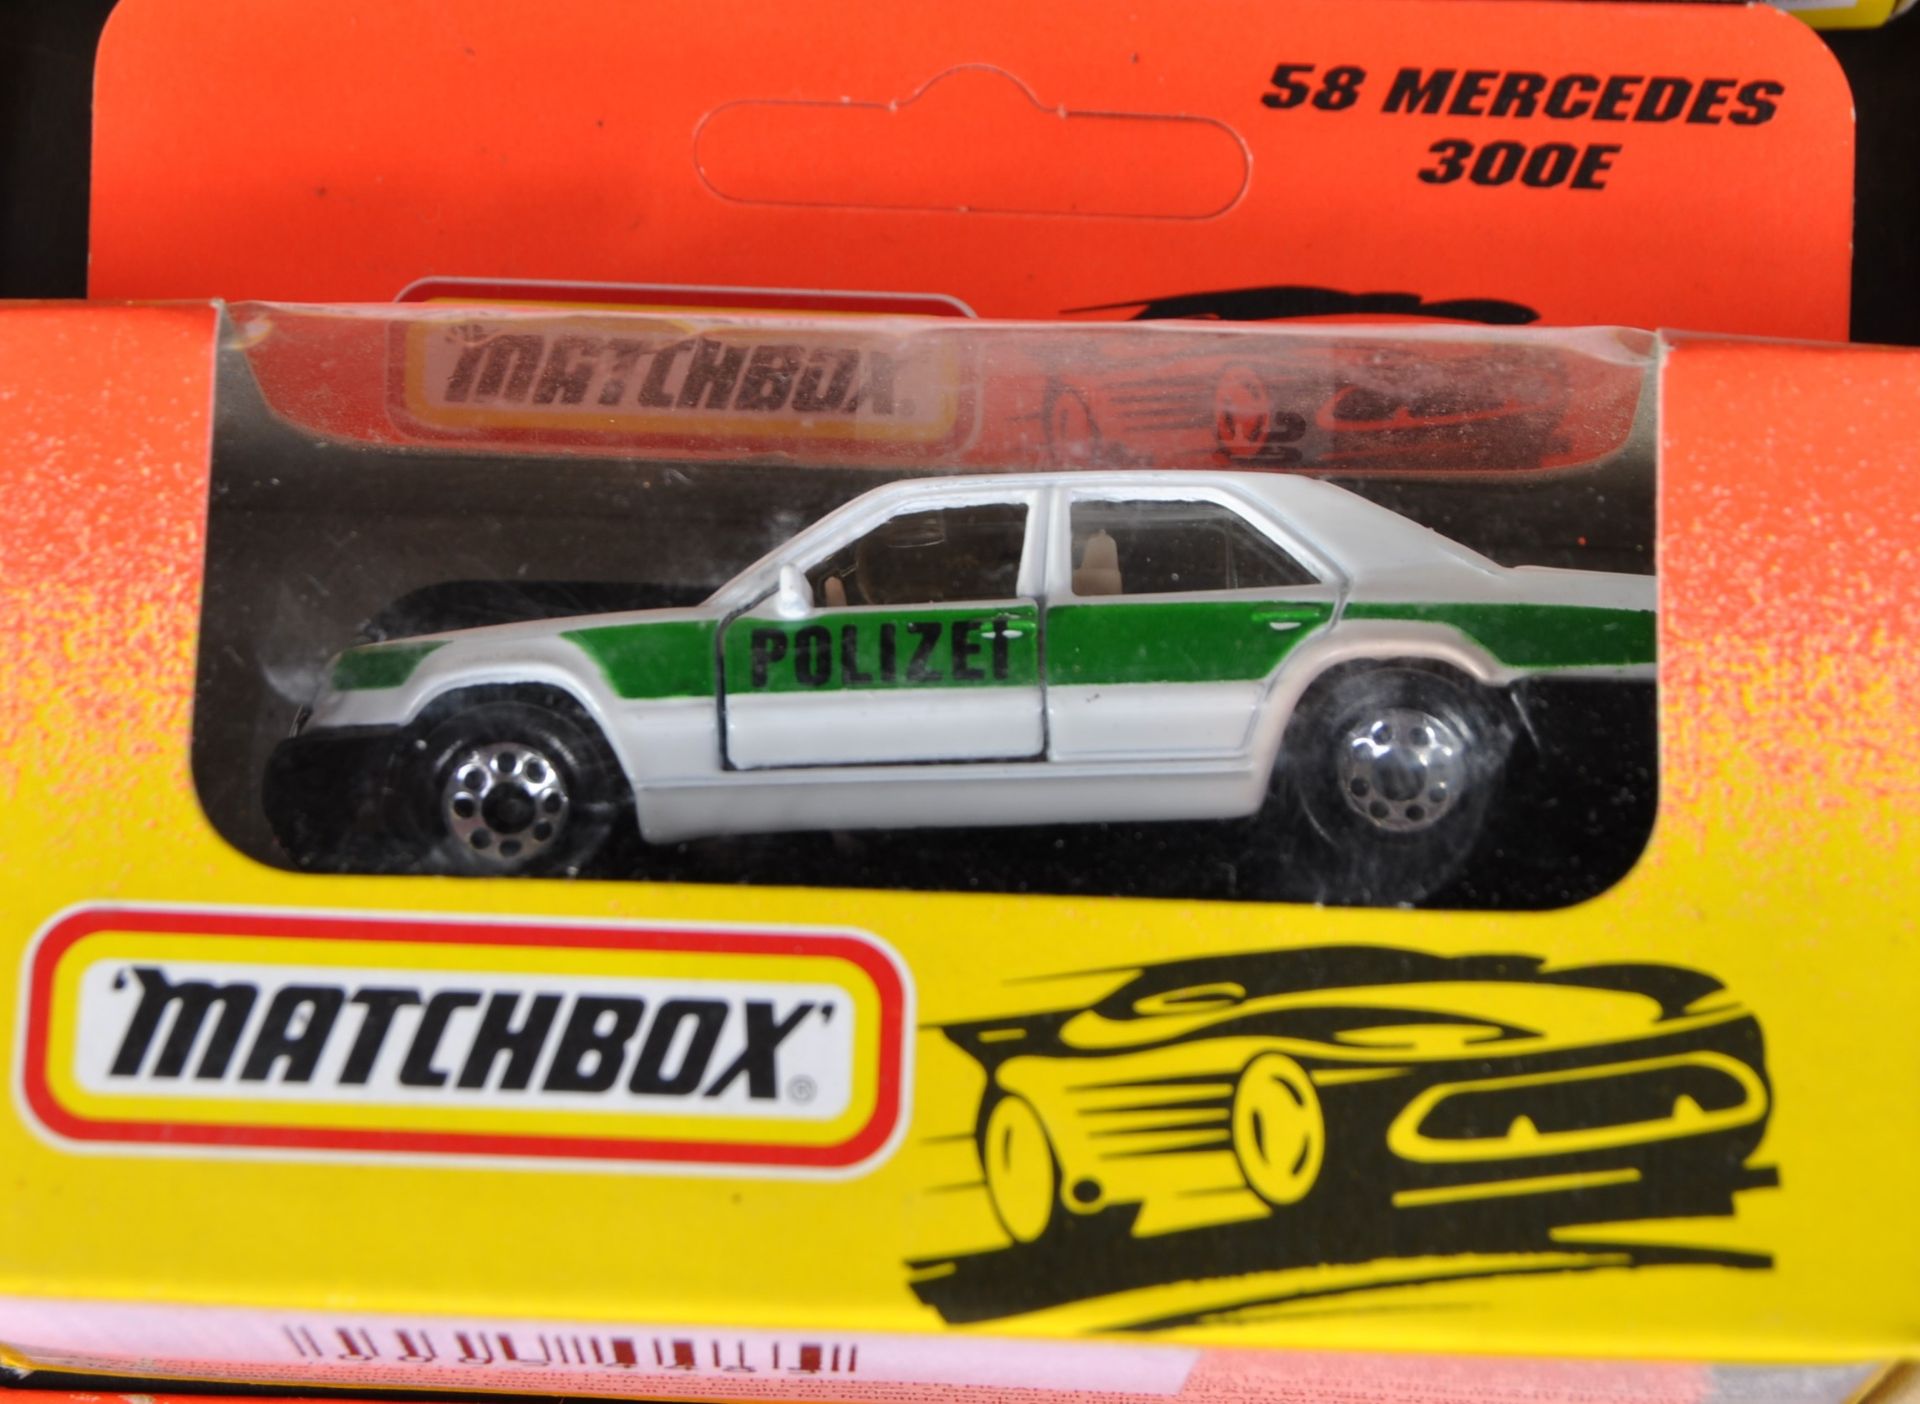 COLLECTION OF VINTAGE MATCHBOX DIECAST MODEL CARS - Image 3 of 7